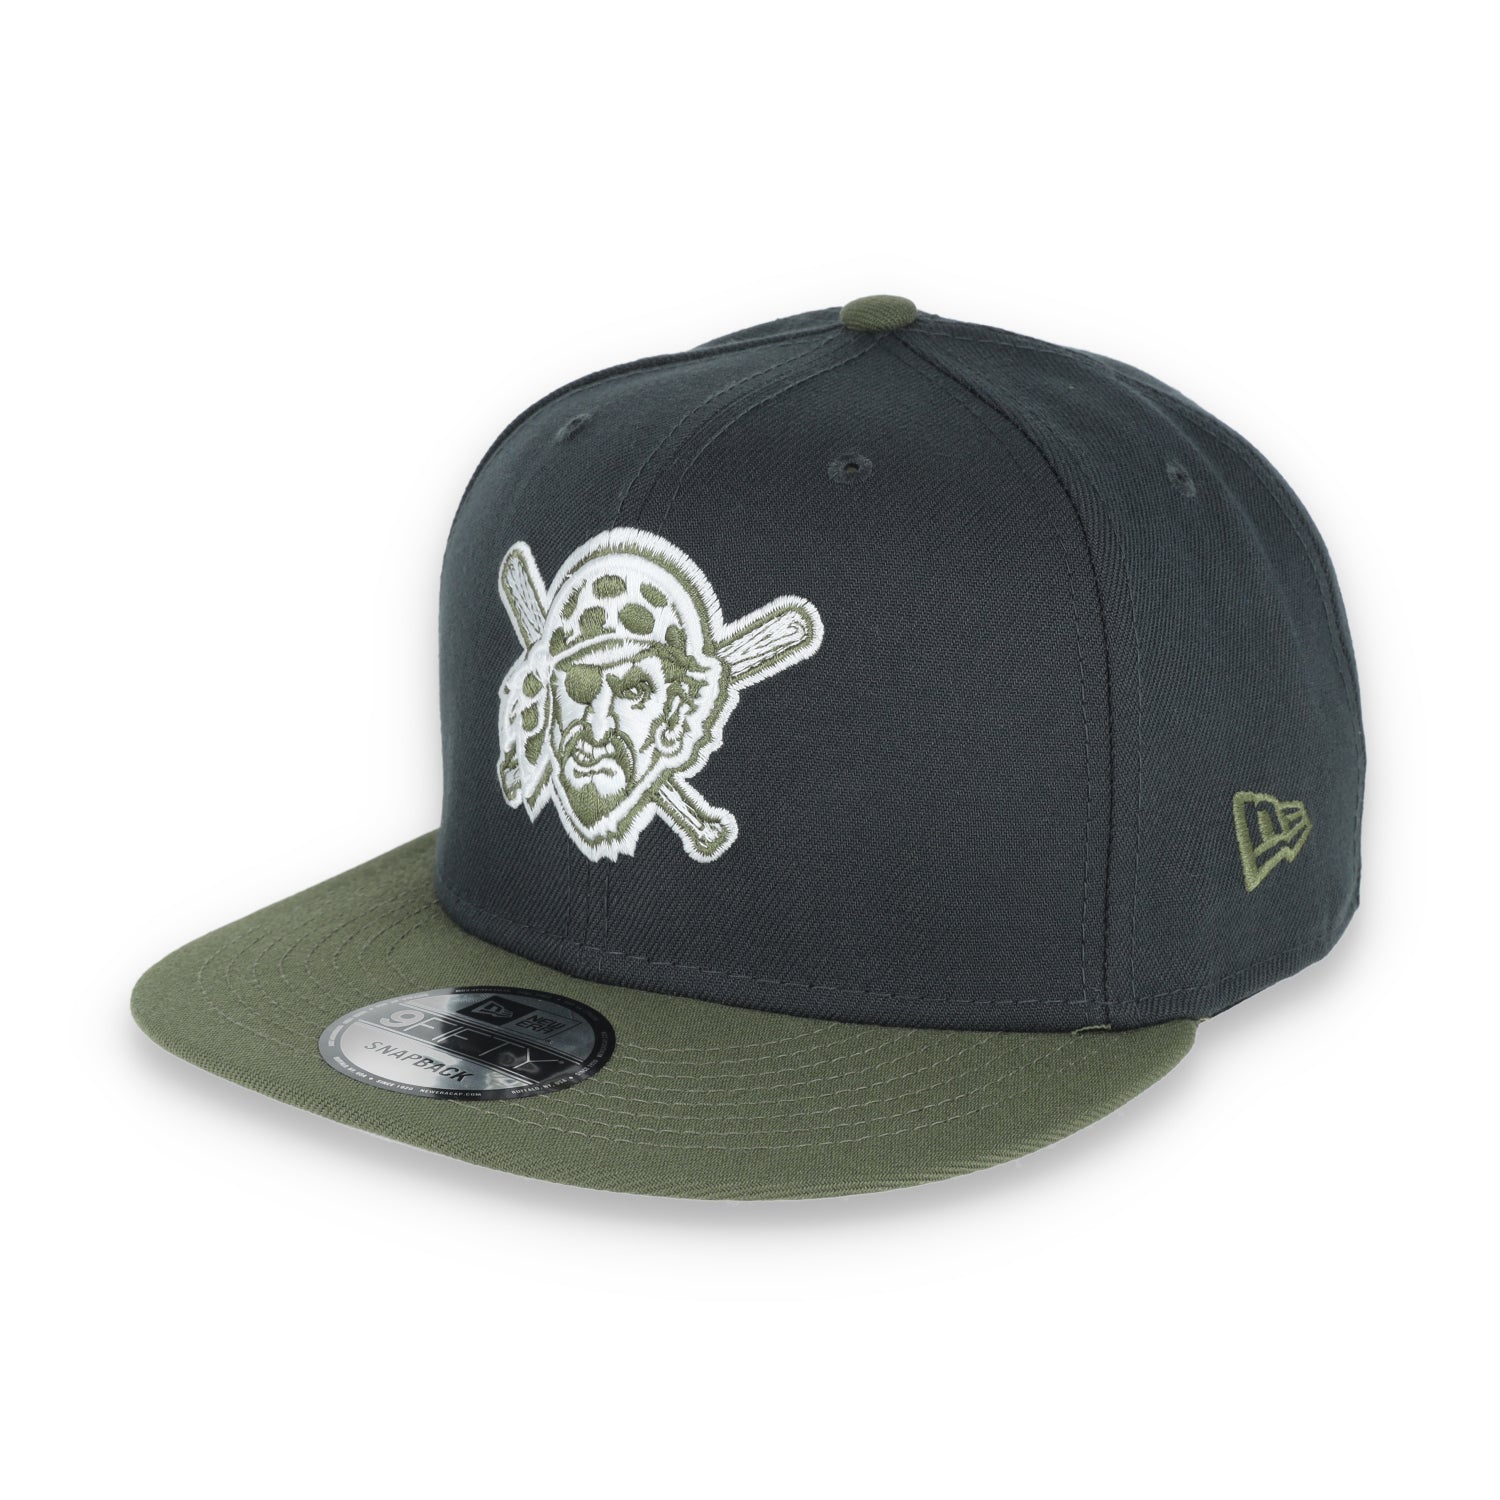 New Era Pittsburgh Pirates 2-Tone Color Pack 9FIFTY Snapback Hat - Grey/Olive